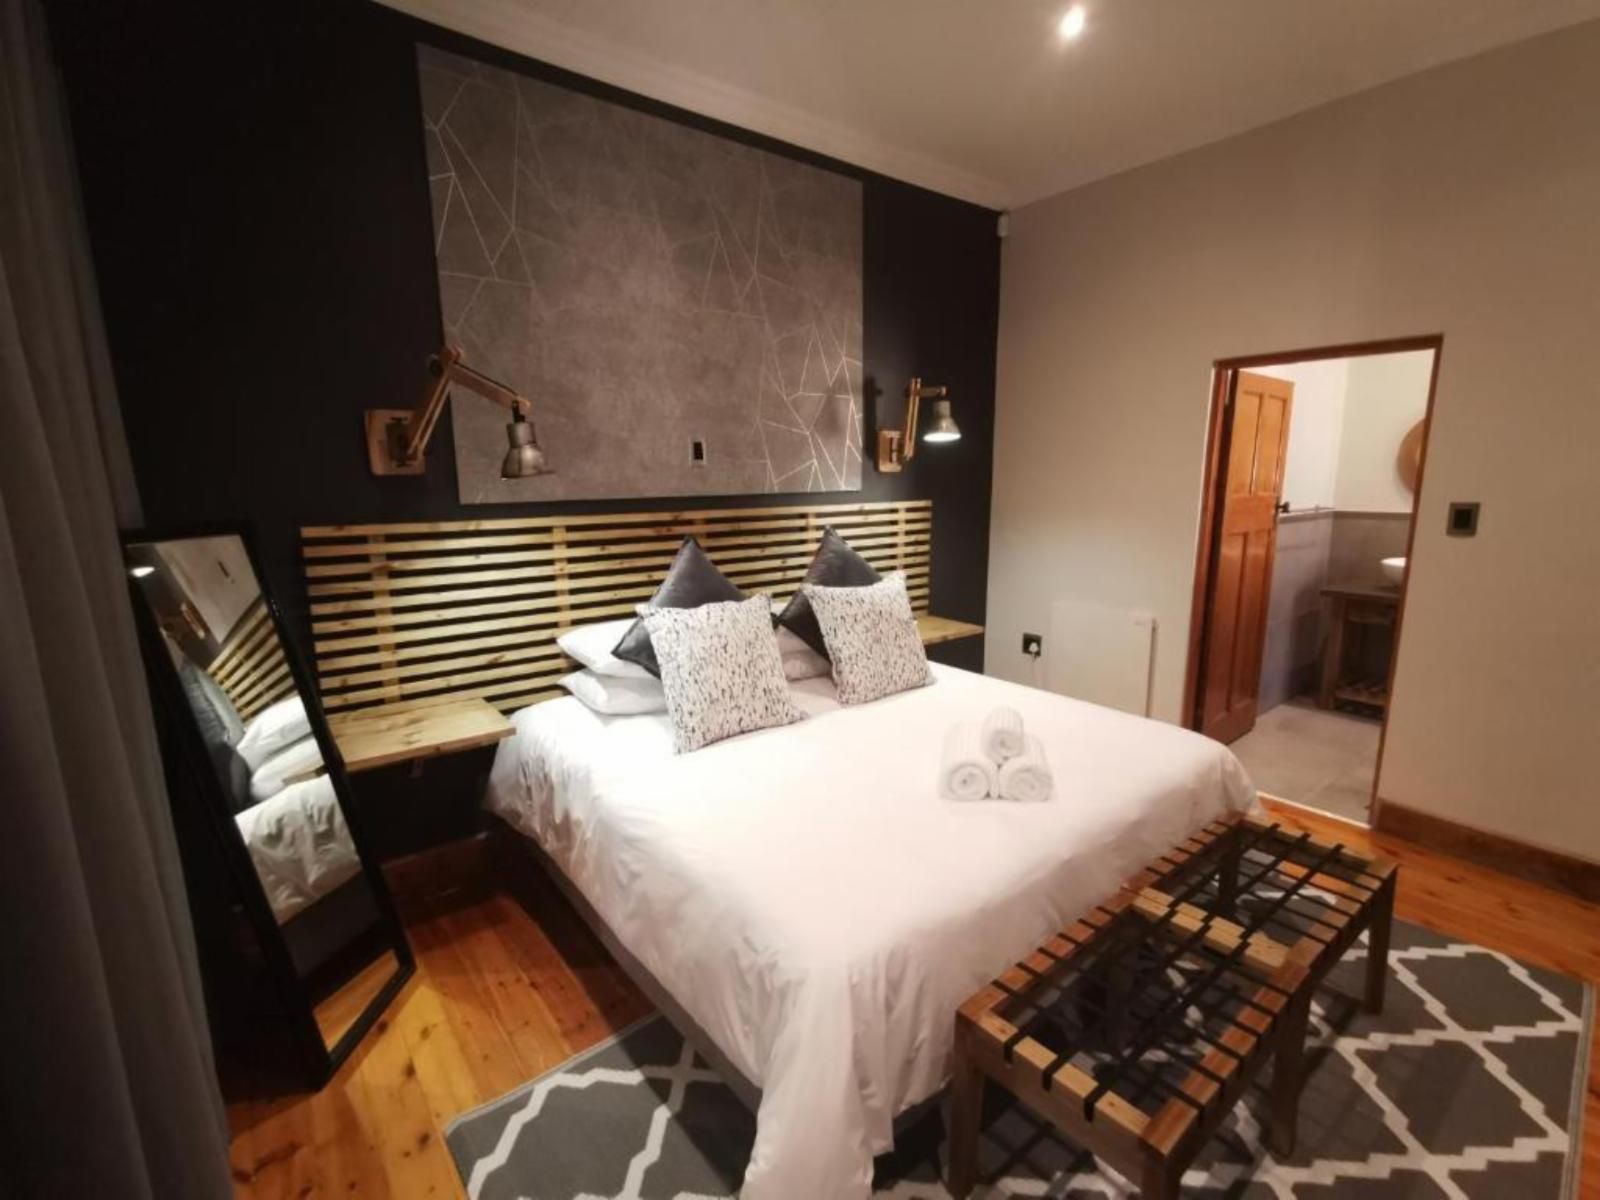 Guest Suites On Connor Willows Bloemfontein Free State South Africa Sepia Tones, Bedroom